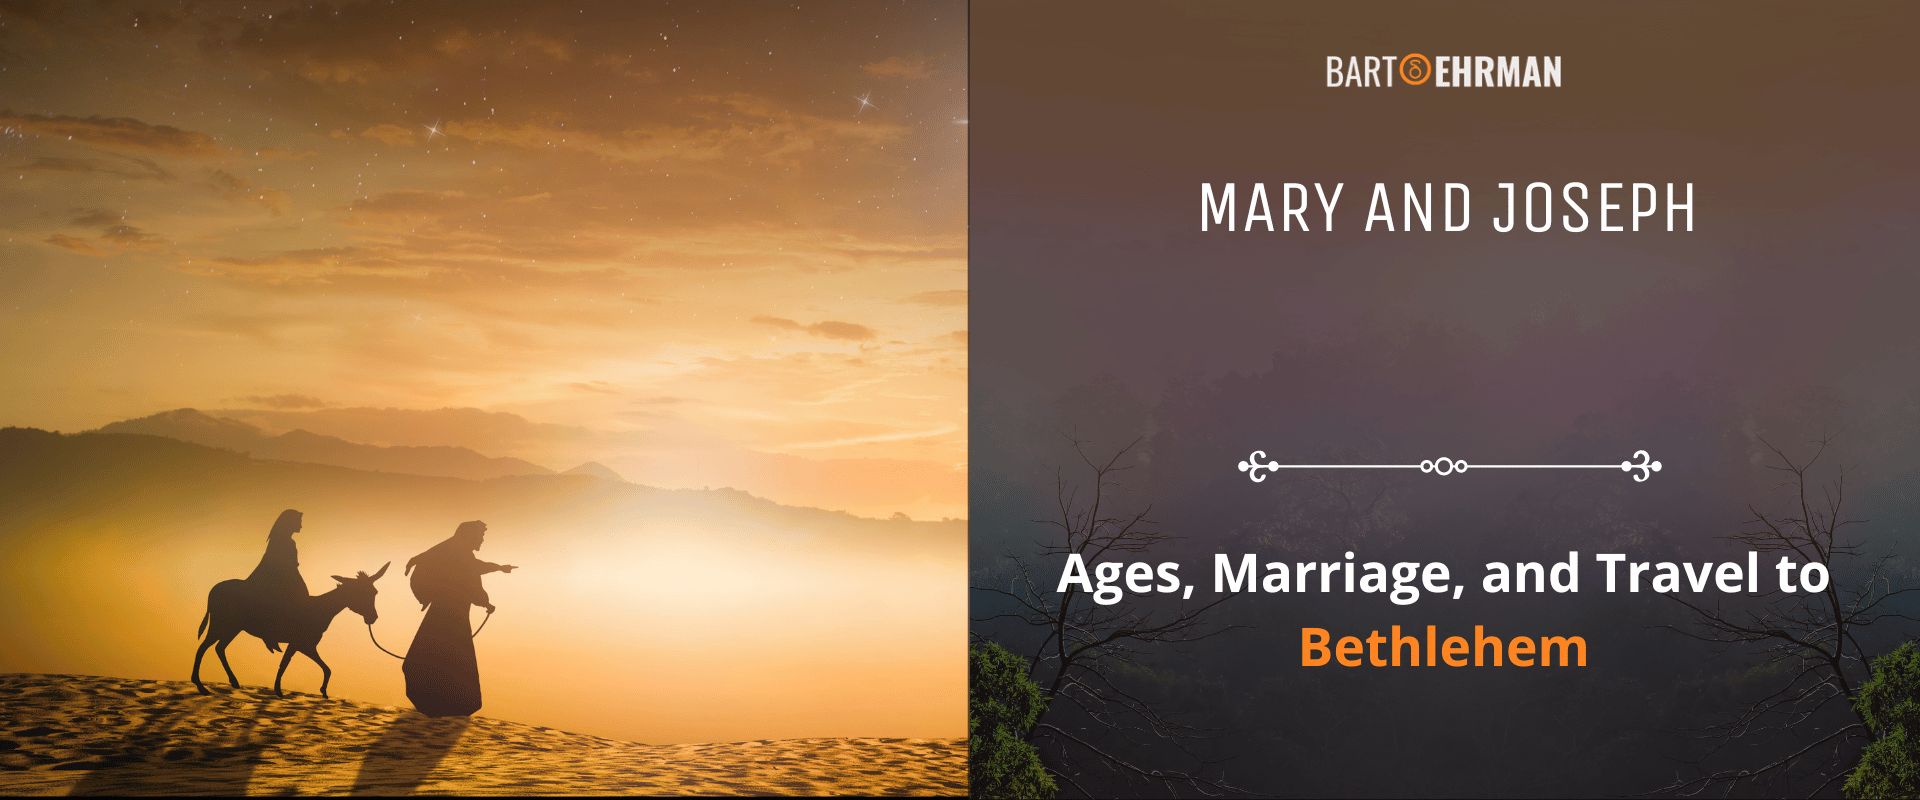 Mary and Joseph Ages, Marriage, and Travel to Bethlehem